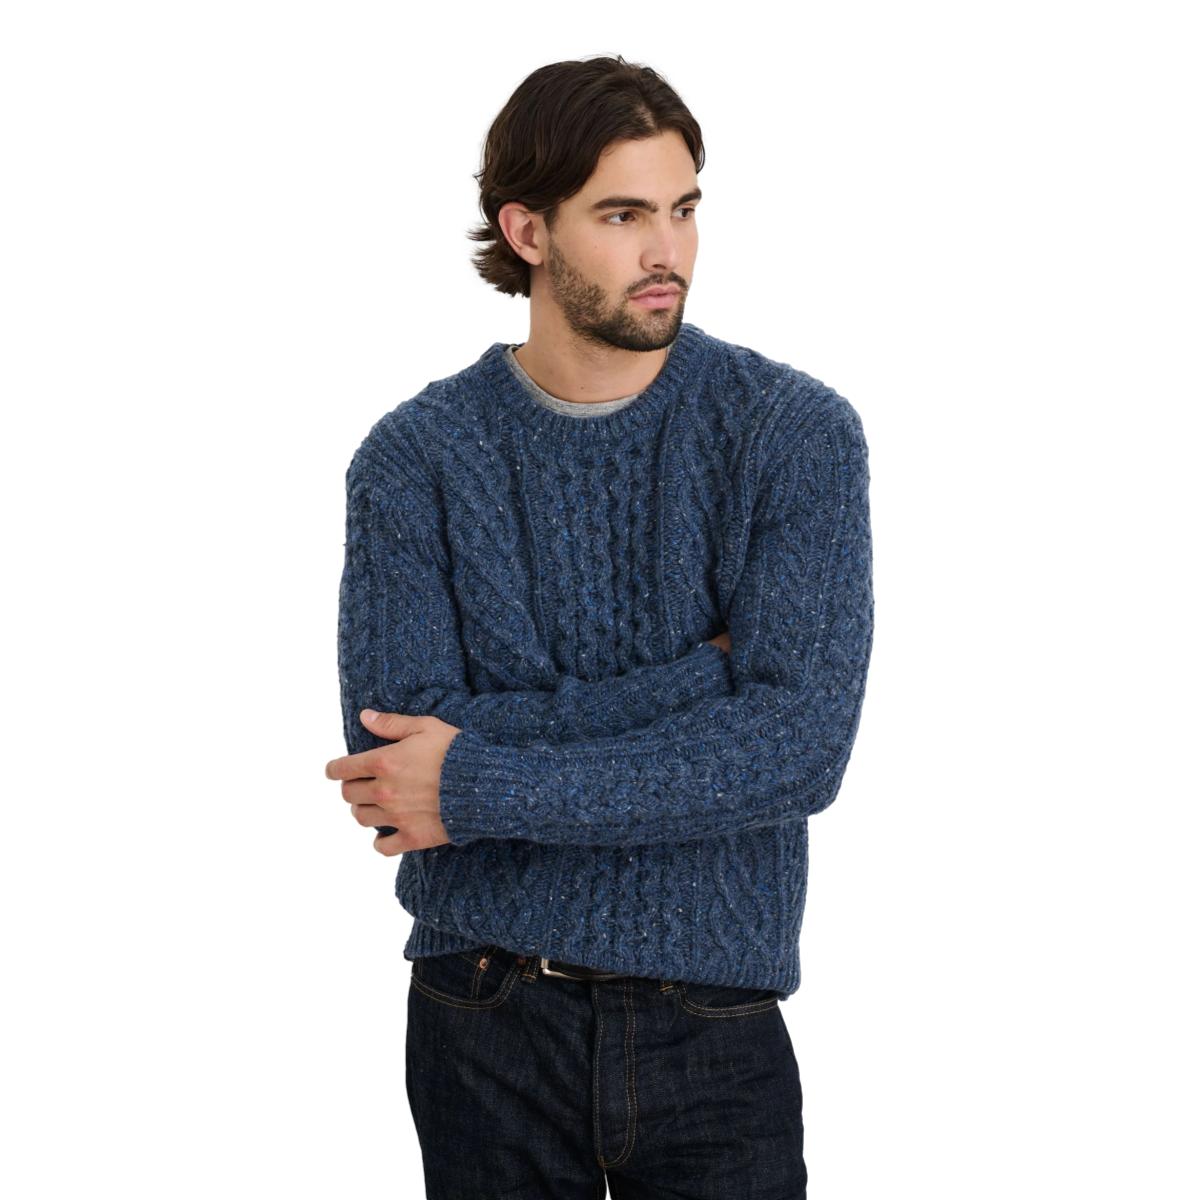 Fisherman Cable Crewneck Donegal Wool Heather Navy - Sweater